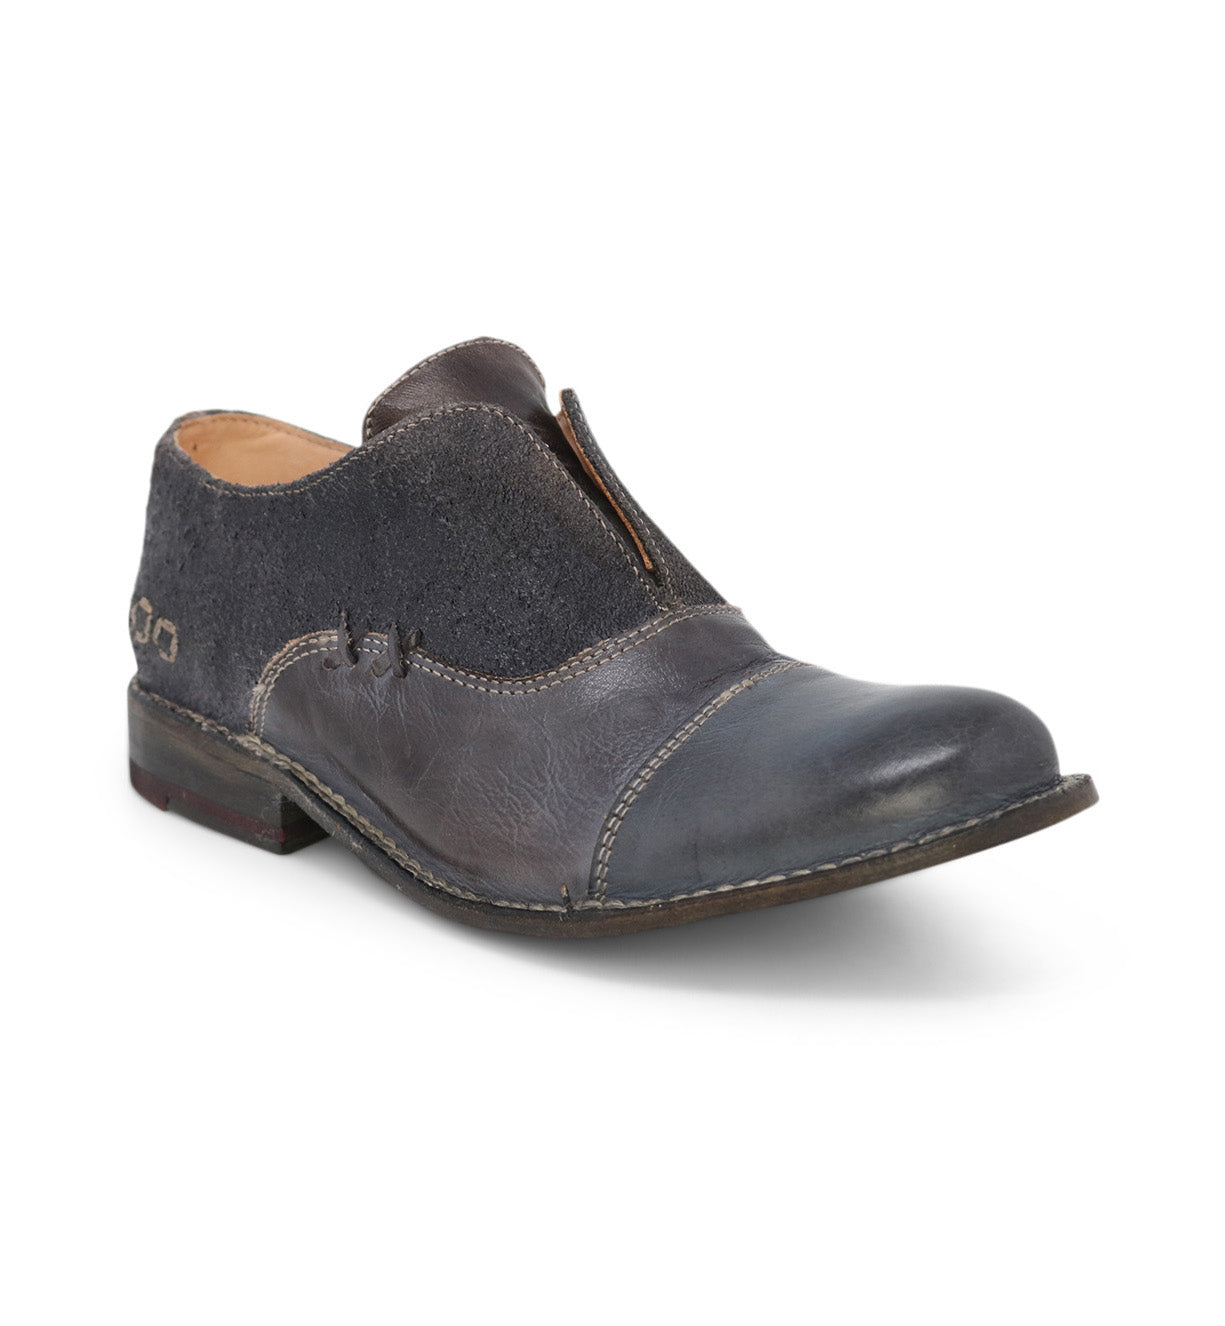 A Bed Stu Garden M men's grey leather shoe with a zipper on the side.